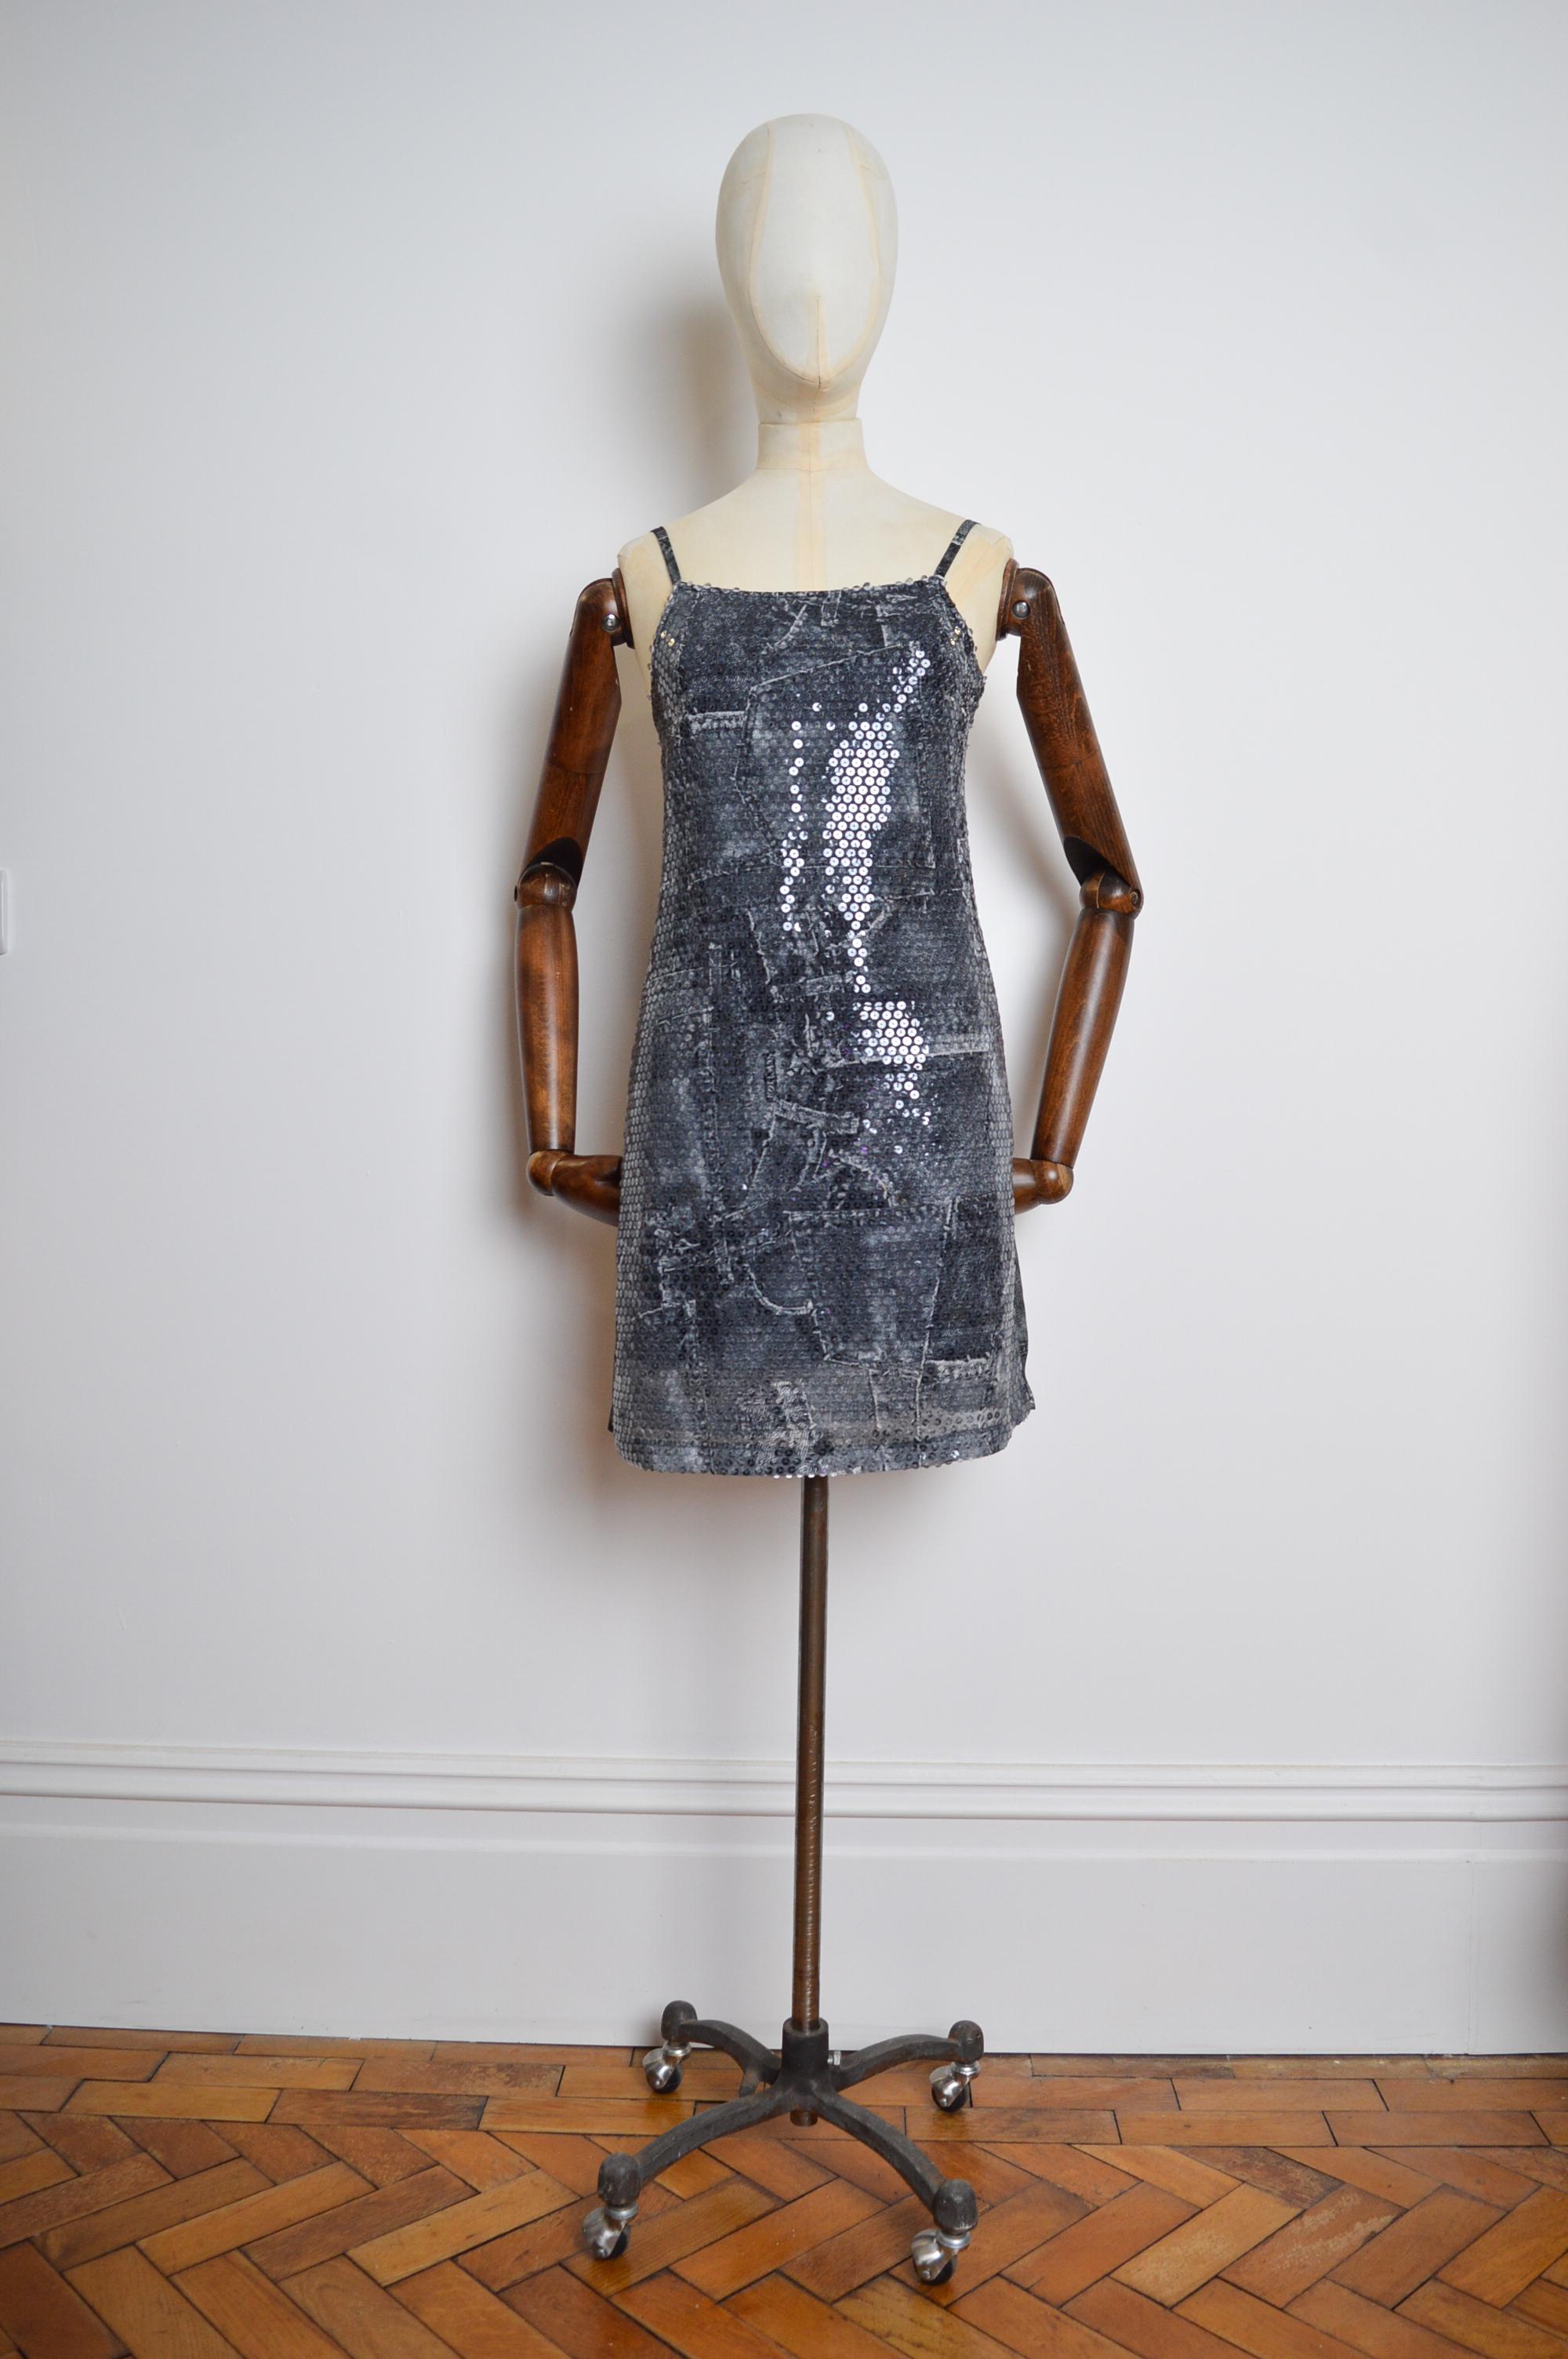 Gorgeous Y2k Vintage 'Donatella era' Versace Strappy, sequinned mini dress !

Crafted in a Denim Trompe l'oeuil rayon material with the front panel being completely covered with thousands of sequins. 

MADE IN ITALY !  

Features: 
Concealed zip up